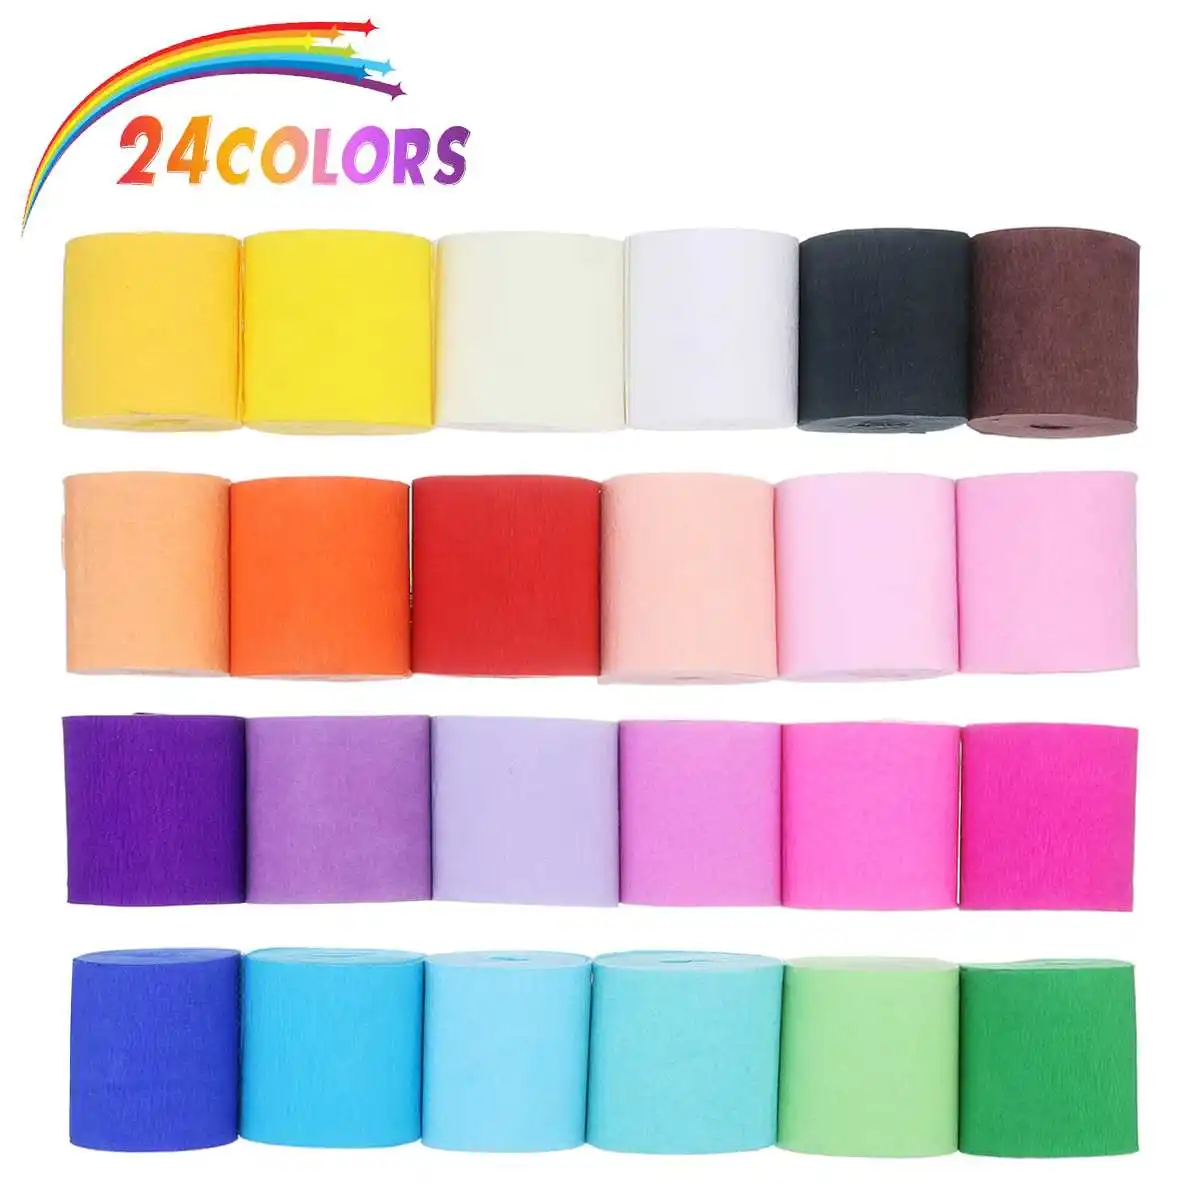 24Pcs/set Colored Crepe Paper Roll Origami Crinkled Crepe Paper Craft DIY Flowers Decoration Gift Wrapping Paper Craft Decor